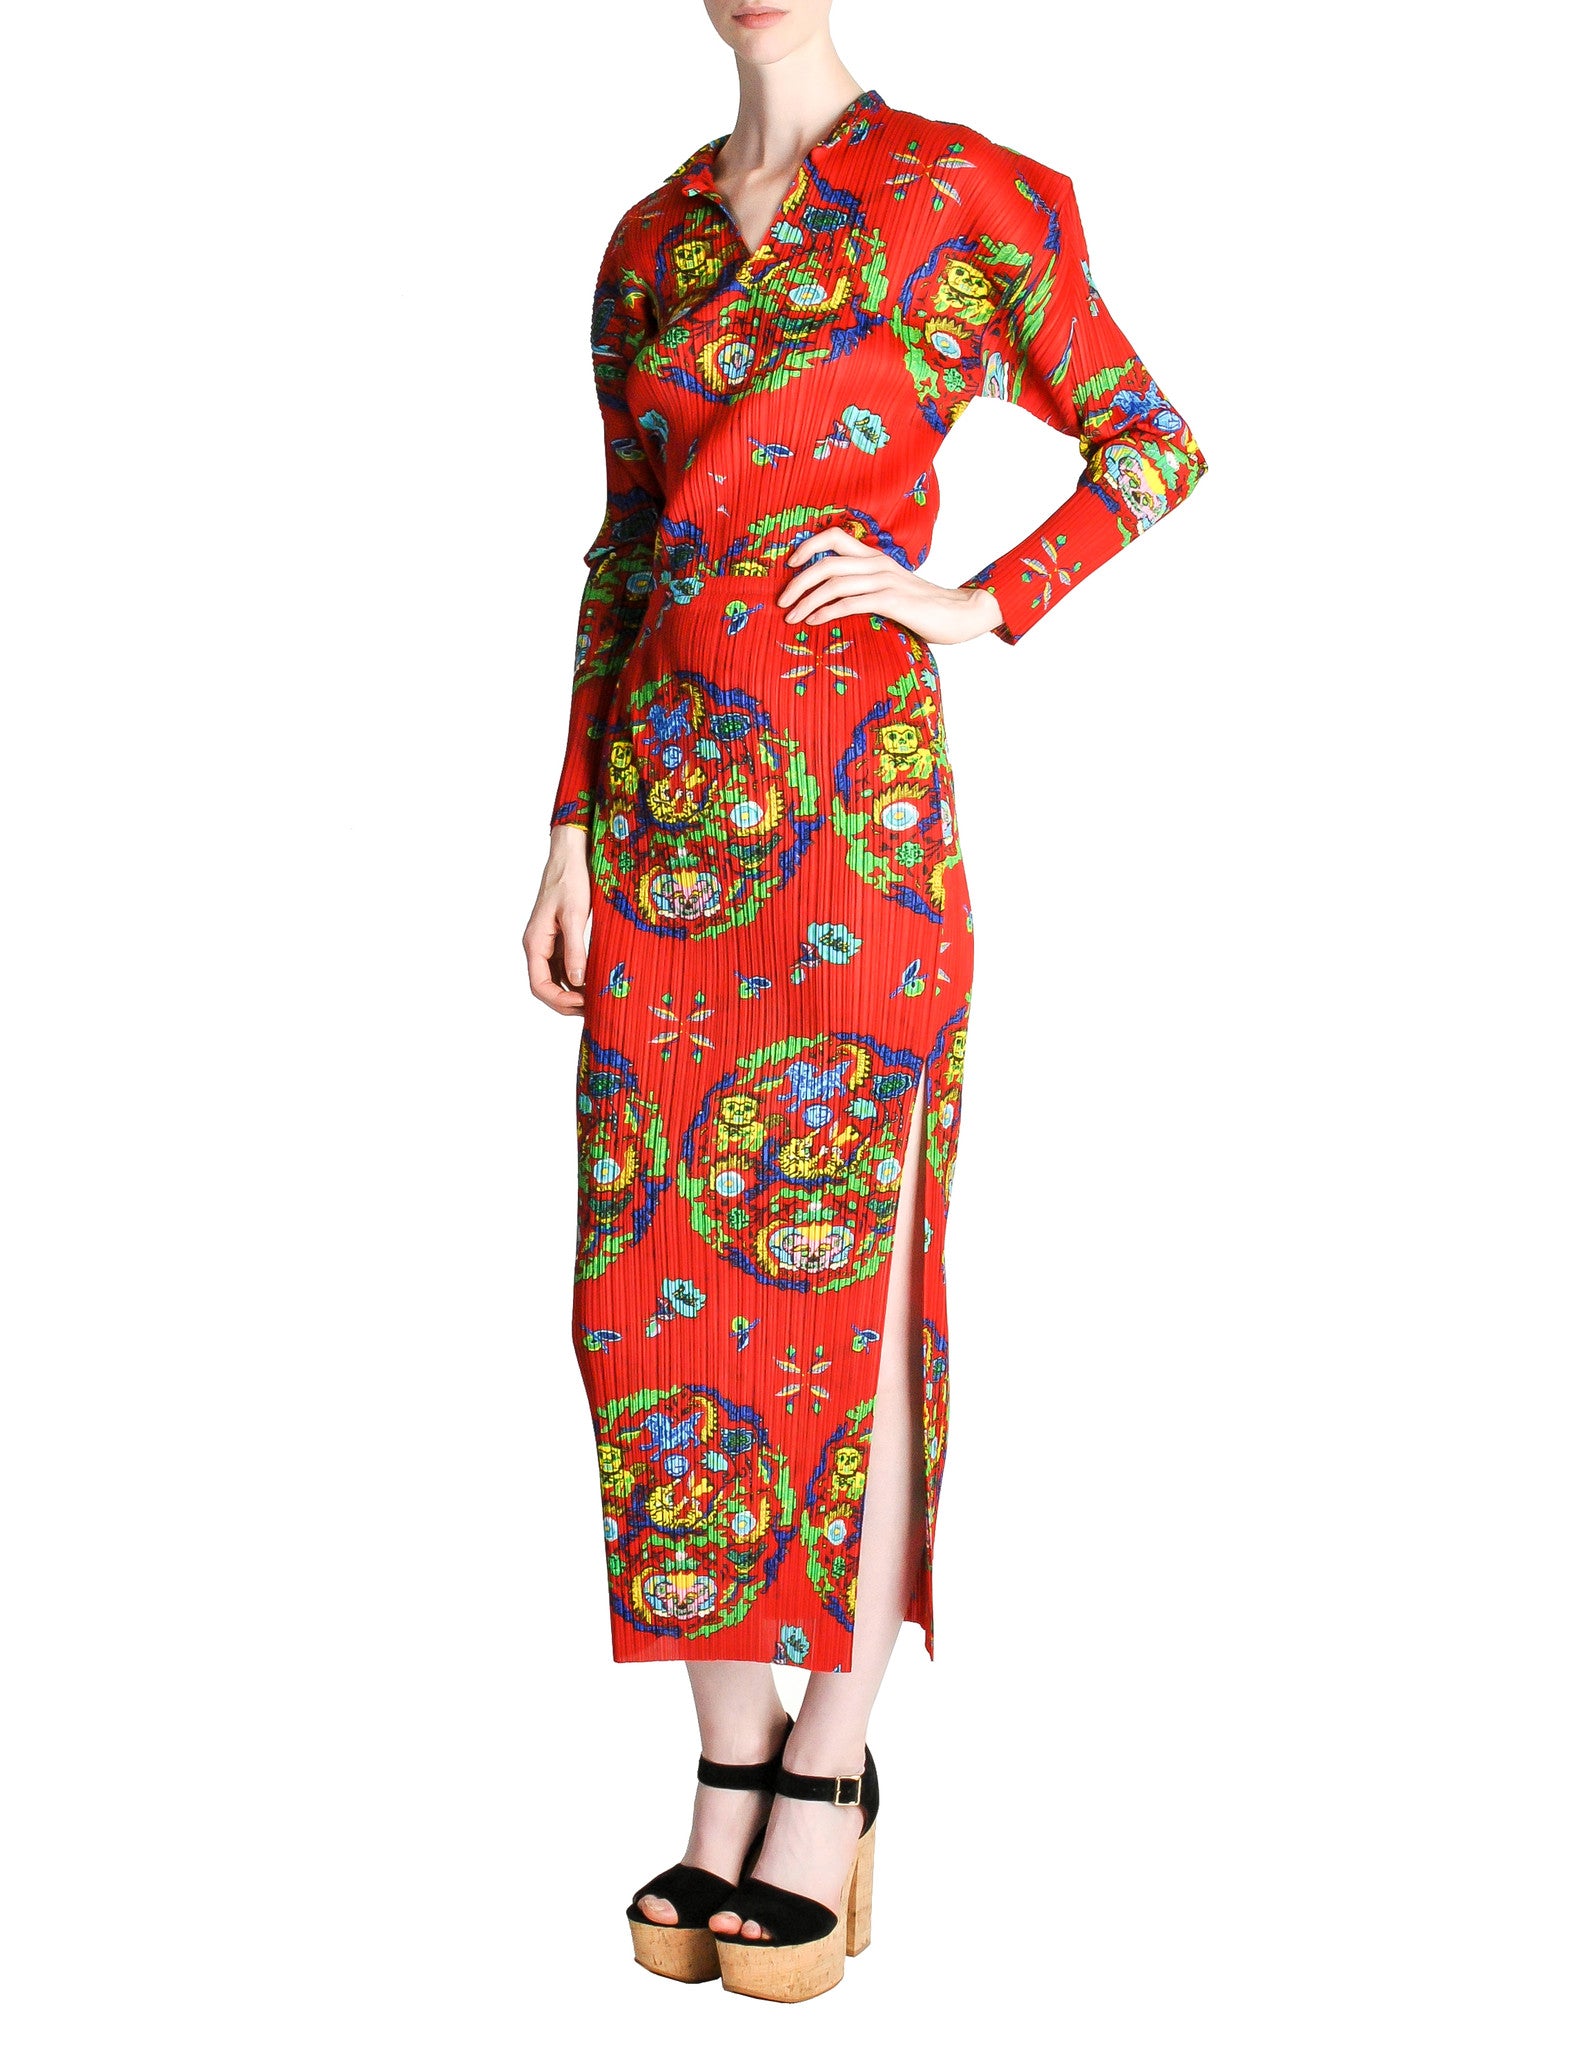 Issey Miyake Pleats Please Vintage Chinese Print Two Piece Top & Skirt Ensemble - Amarcord Vintage Fashion
 - 1